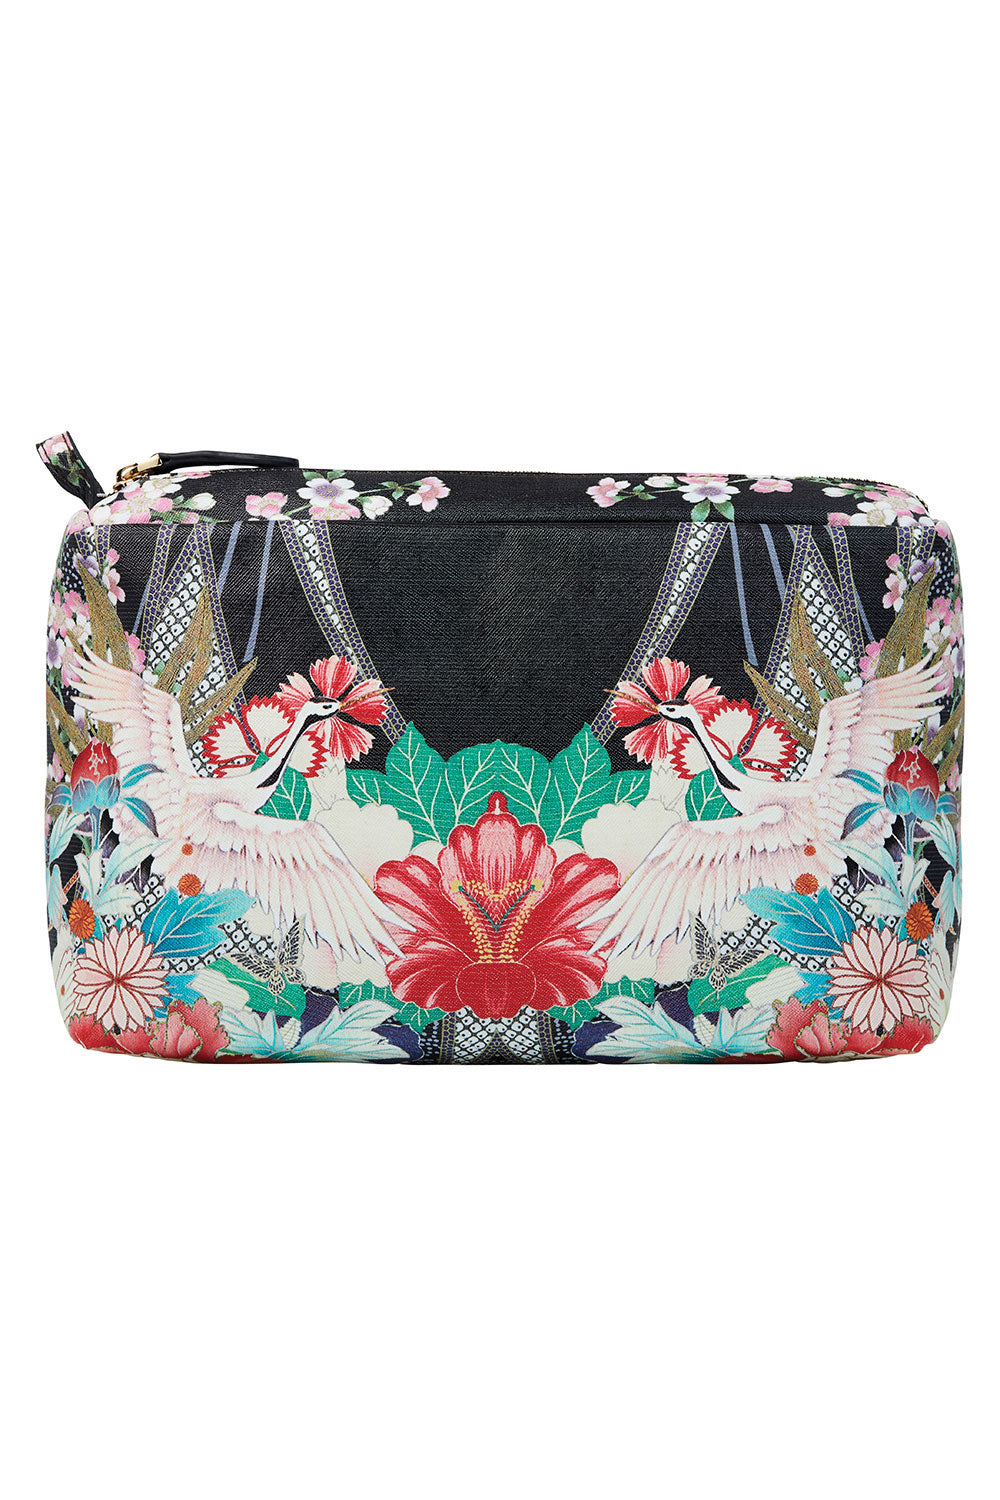 CAMILLA QUEEN OF KINGS MAKE UP BAG